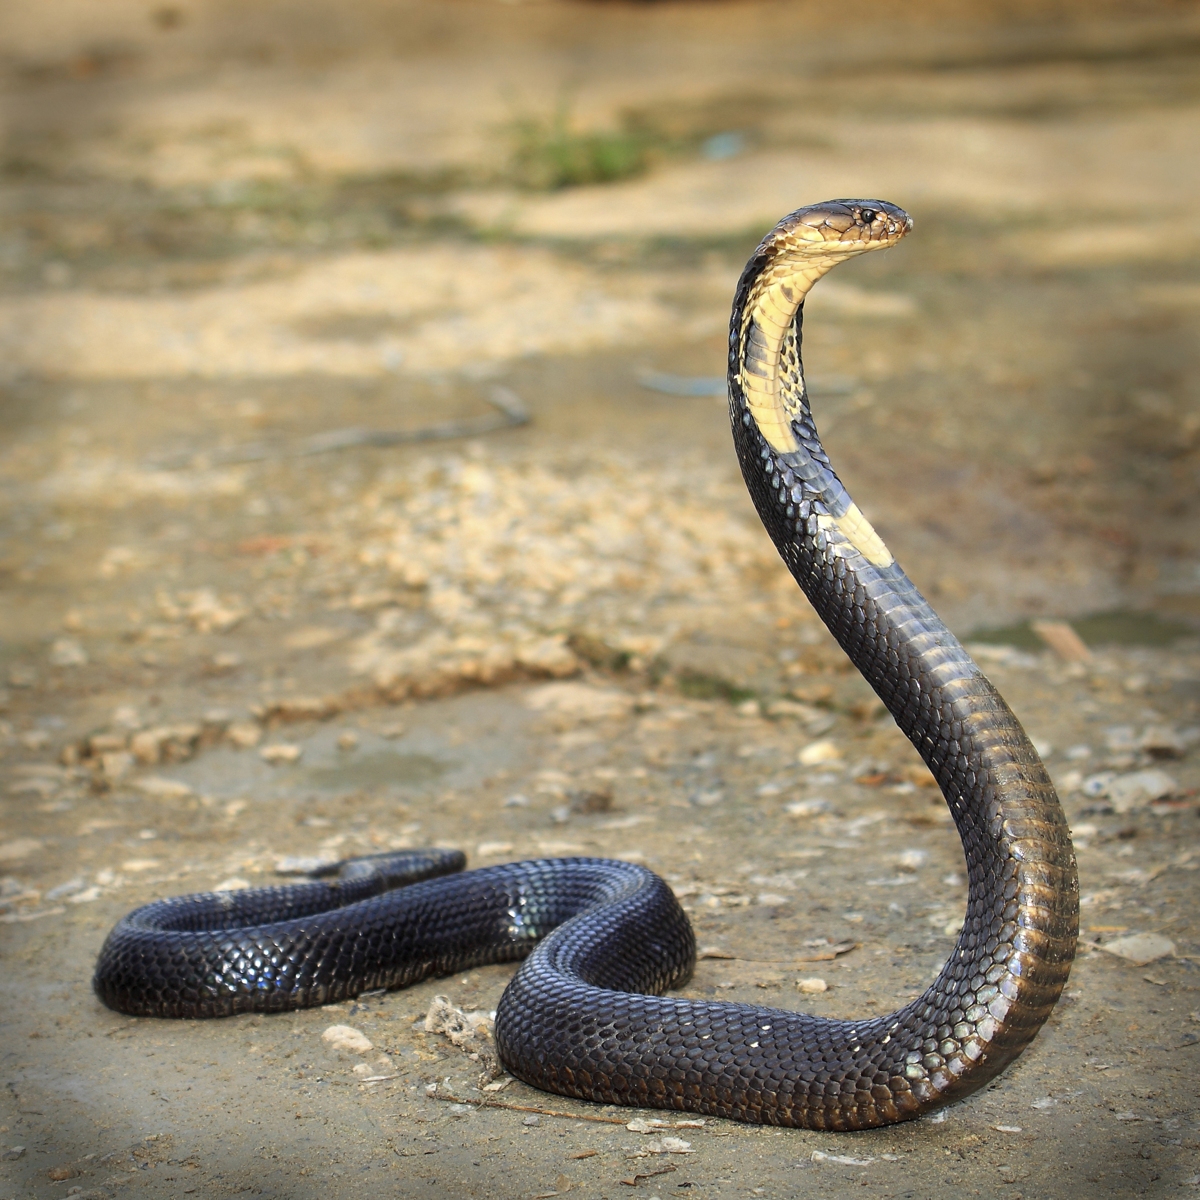 1200-165484029-king-cobra-with-aggression.jpg